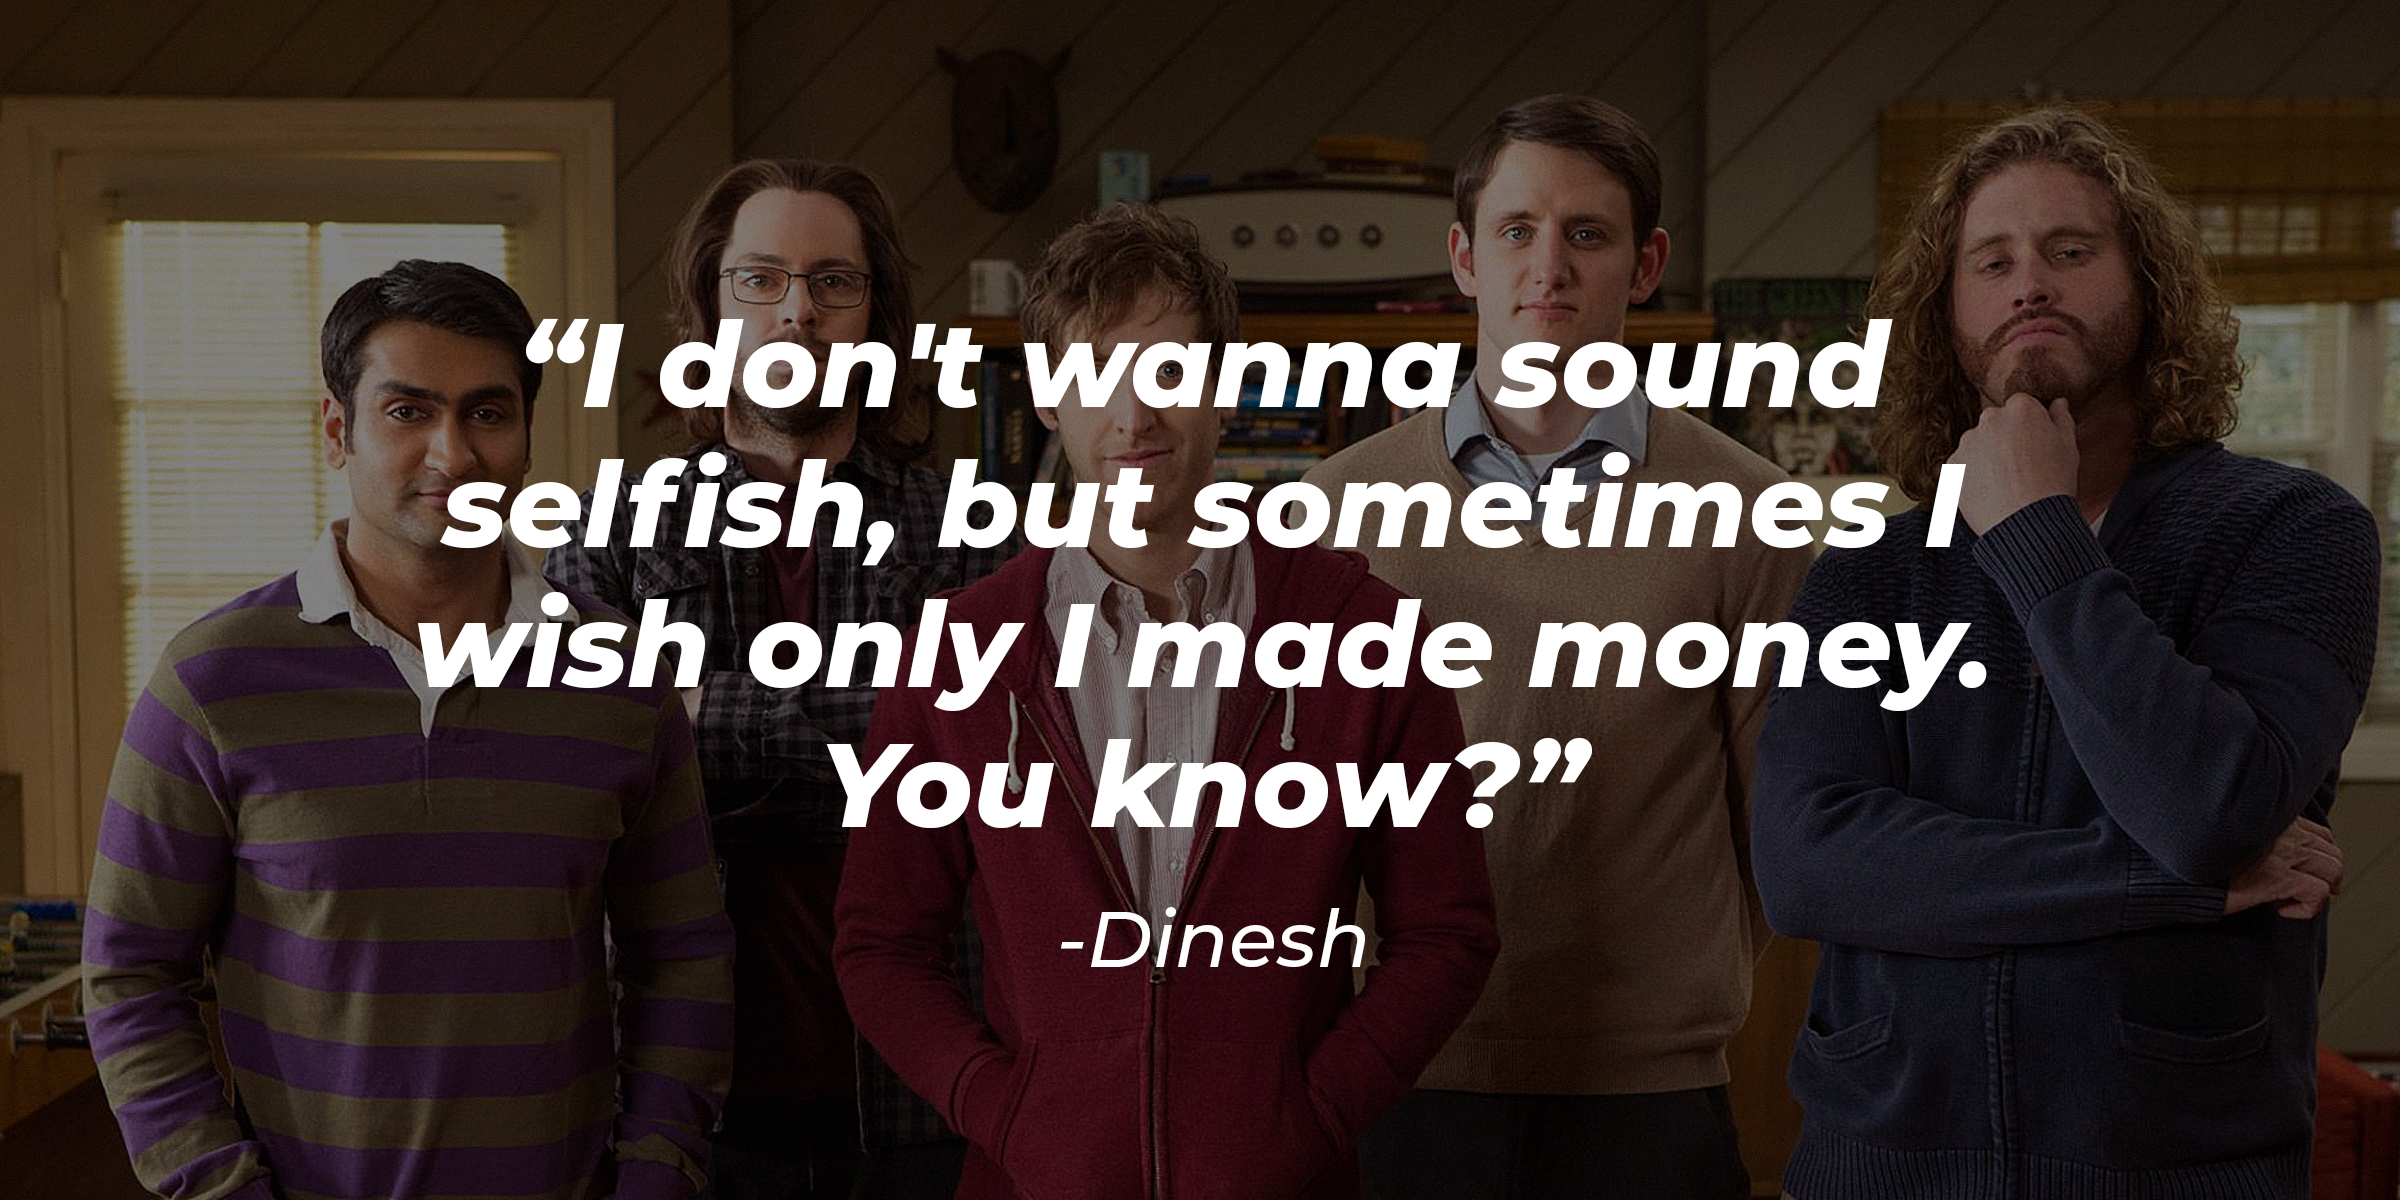 A photo of 'Silicon Valley' cast with Dinesh's quote: “I don't wanna sound selfish, but sometimes I wish only I made money. You know?” | Source: facebook.com/SiliconHBO